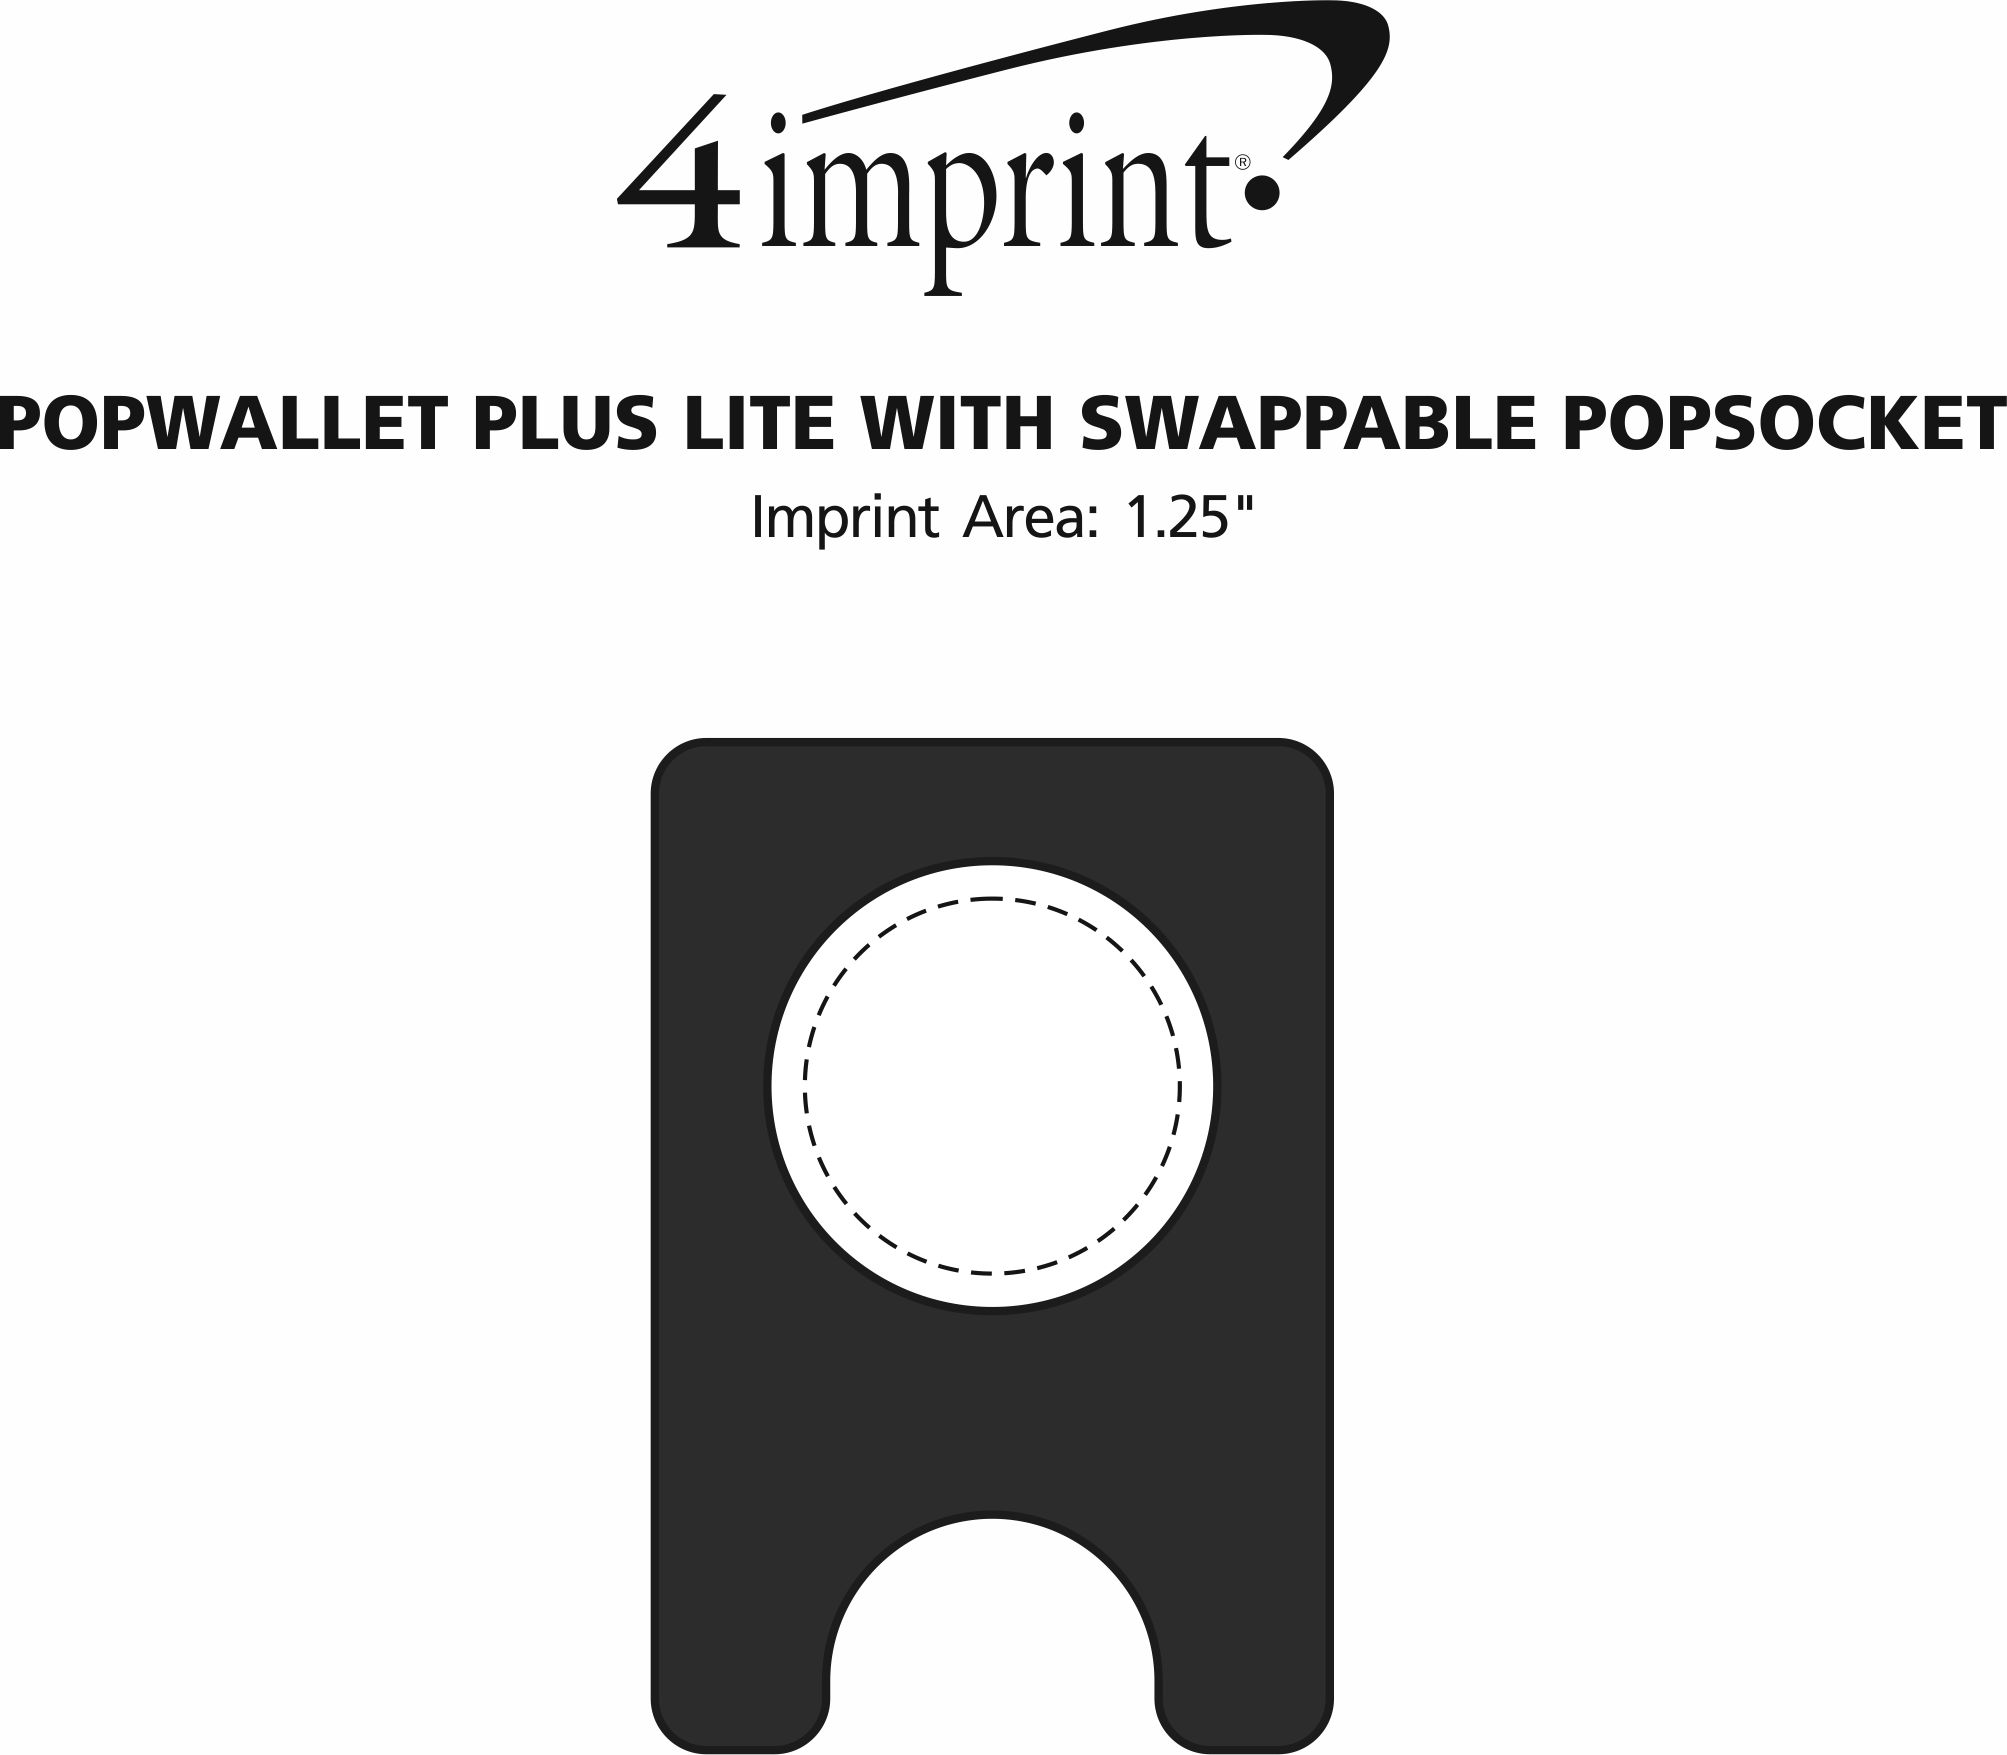 Imprint Area of PopWallet Plus Lite with Swappable PopSocket